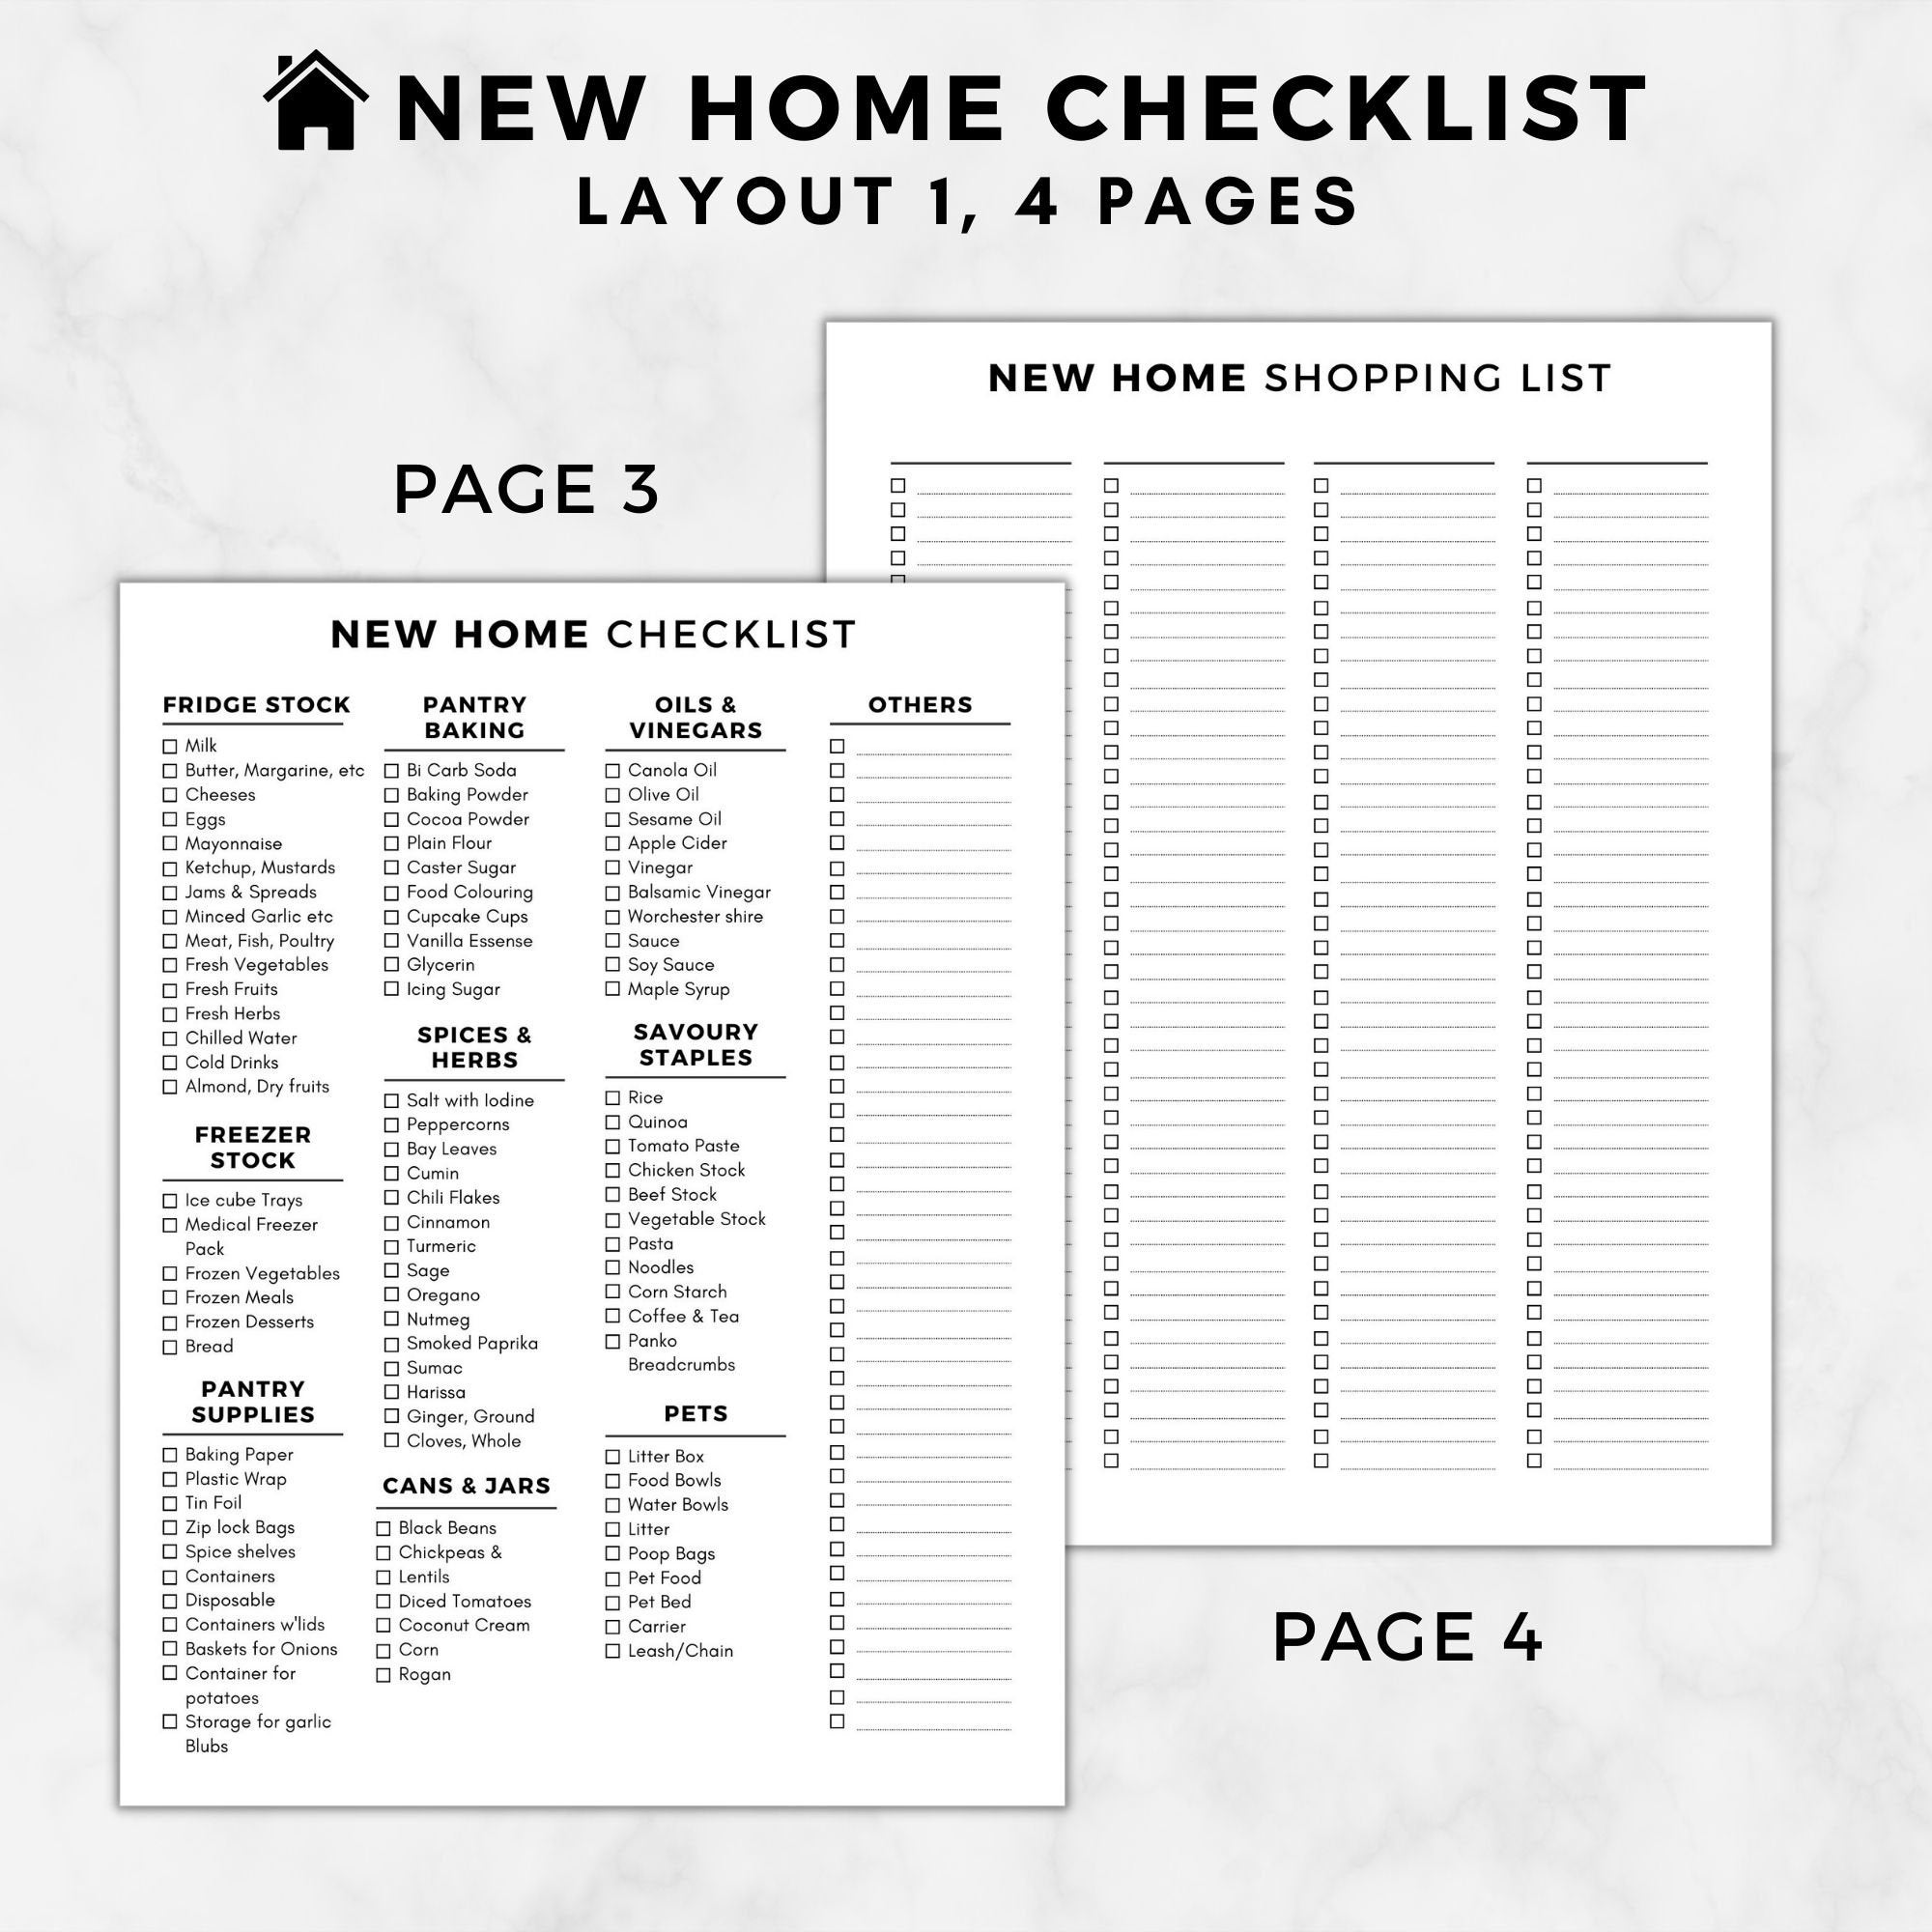 New Home Necessities Checklist  Printable Resource - Live Laugh Rowe